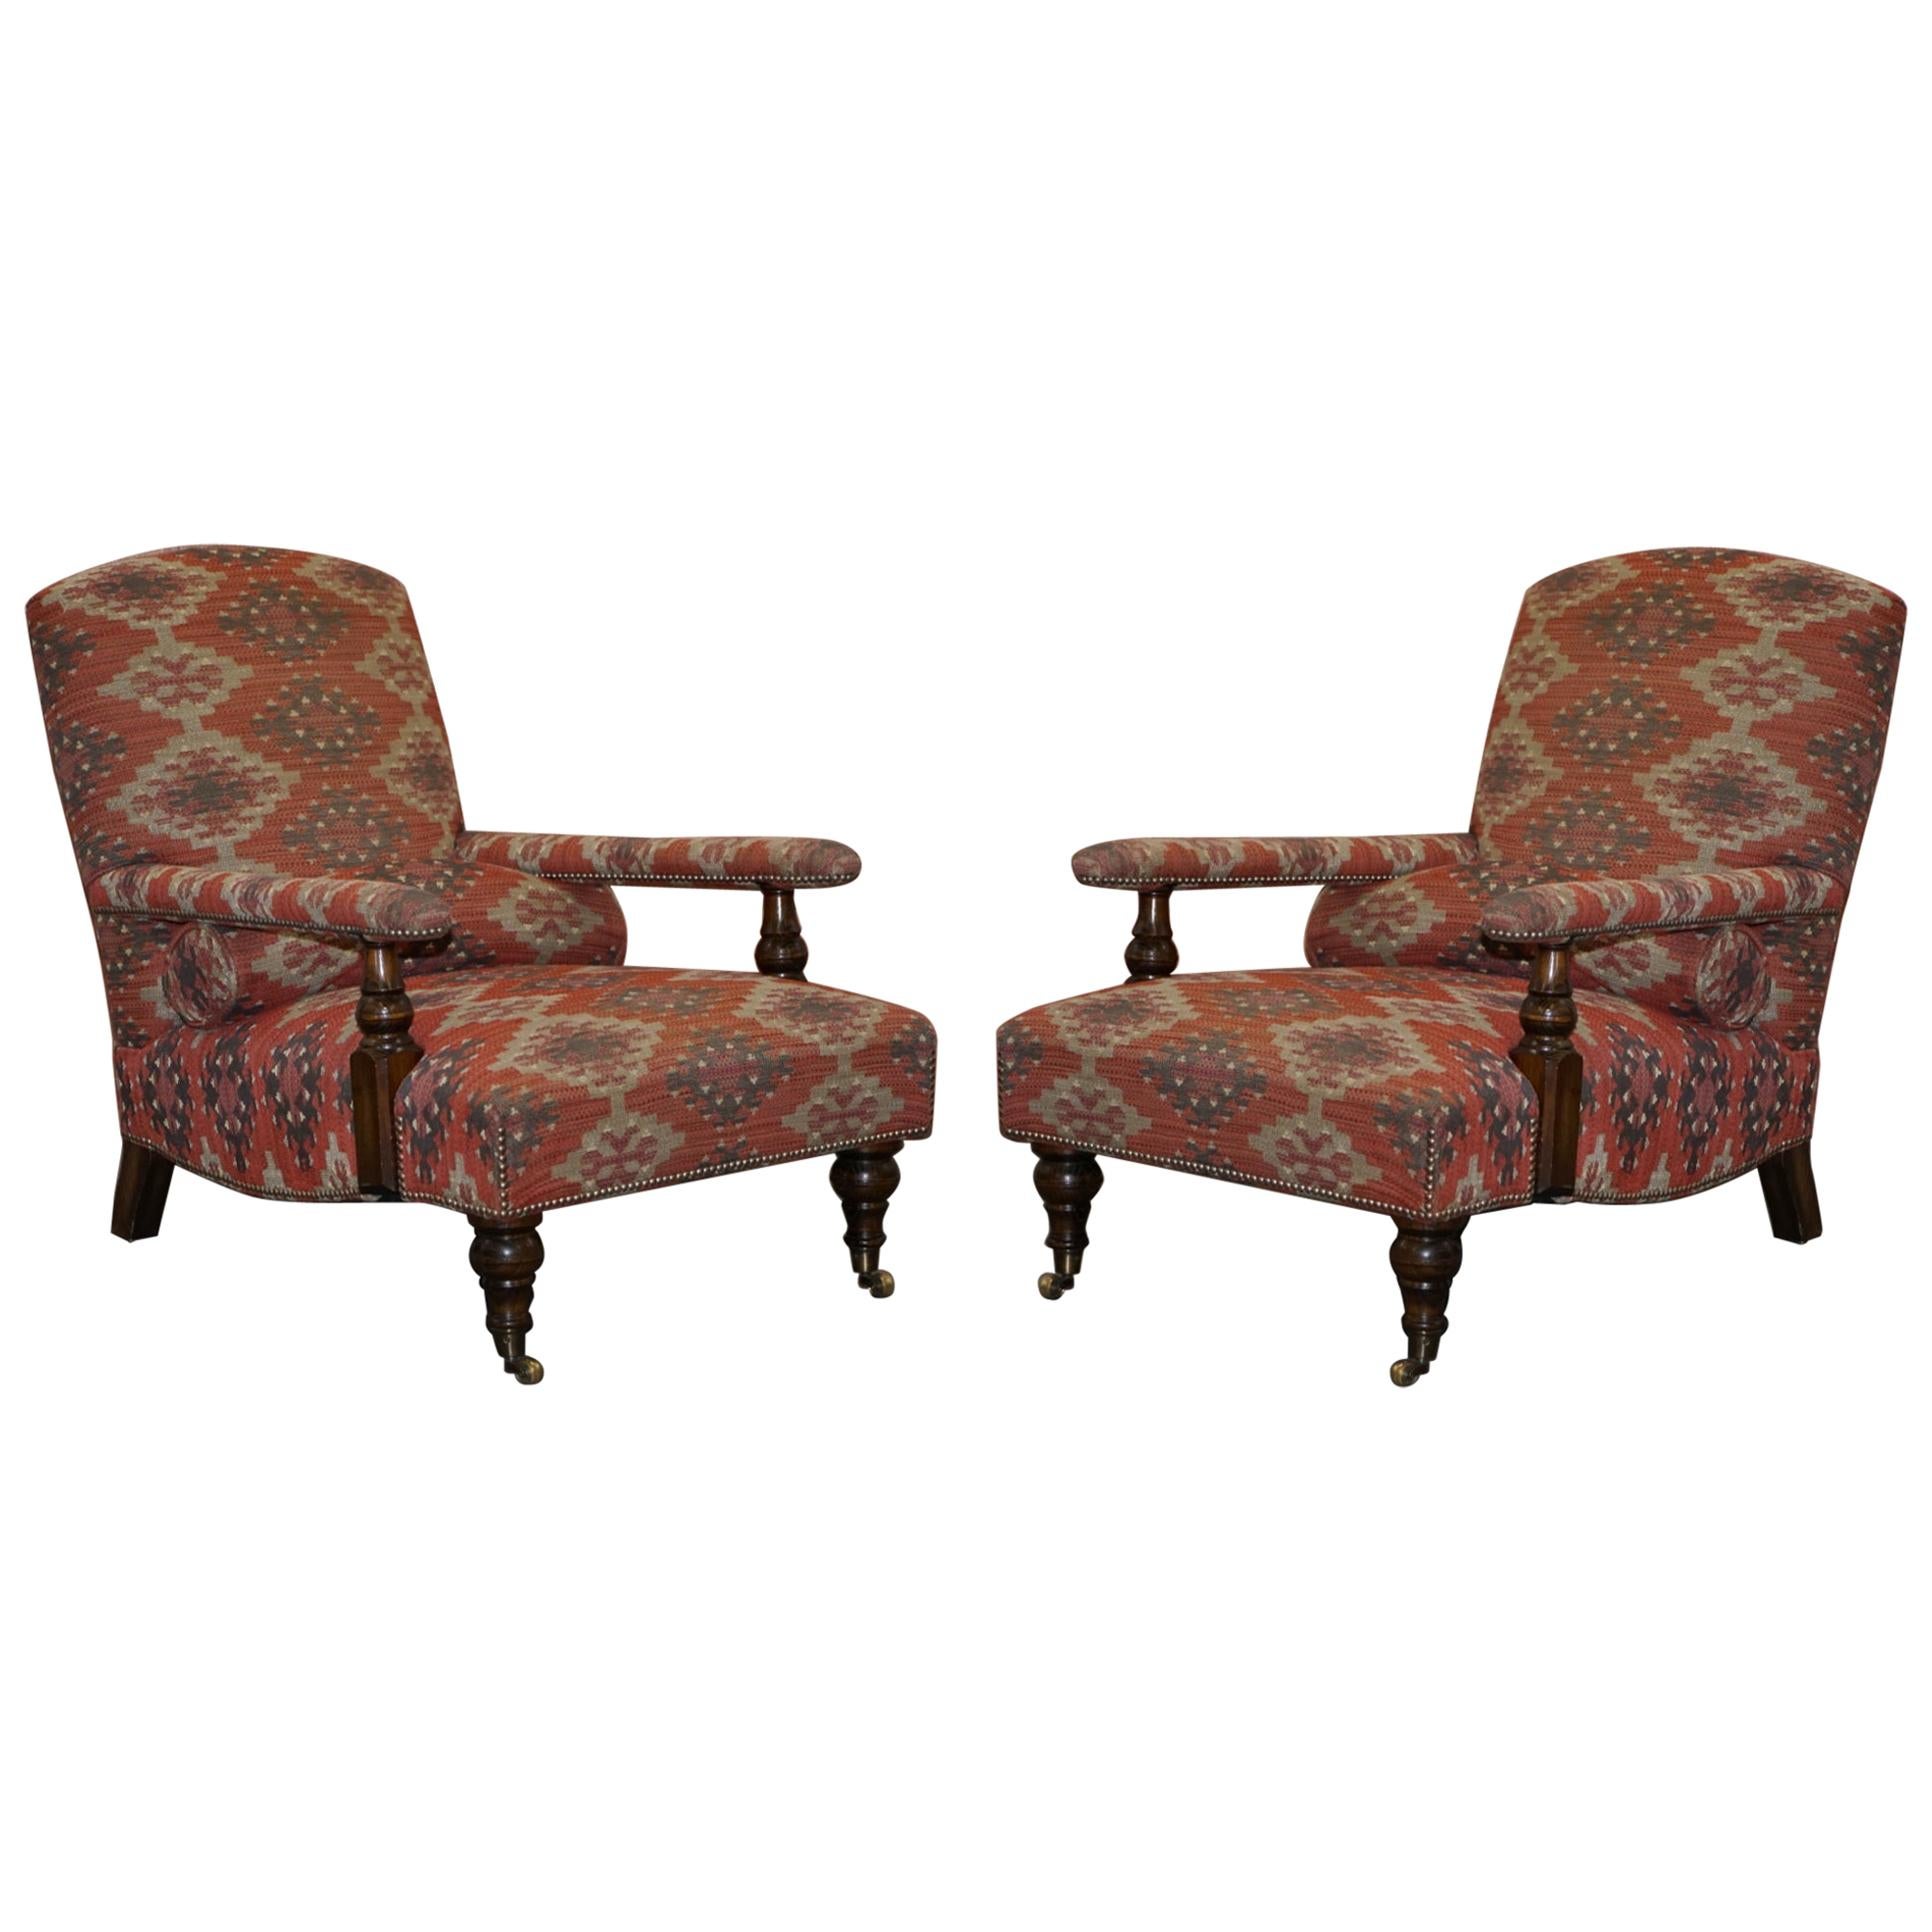 Pair of George Smith Kilim Upholstered Edwardian Library Armchairs